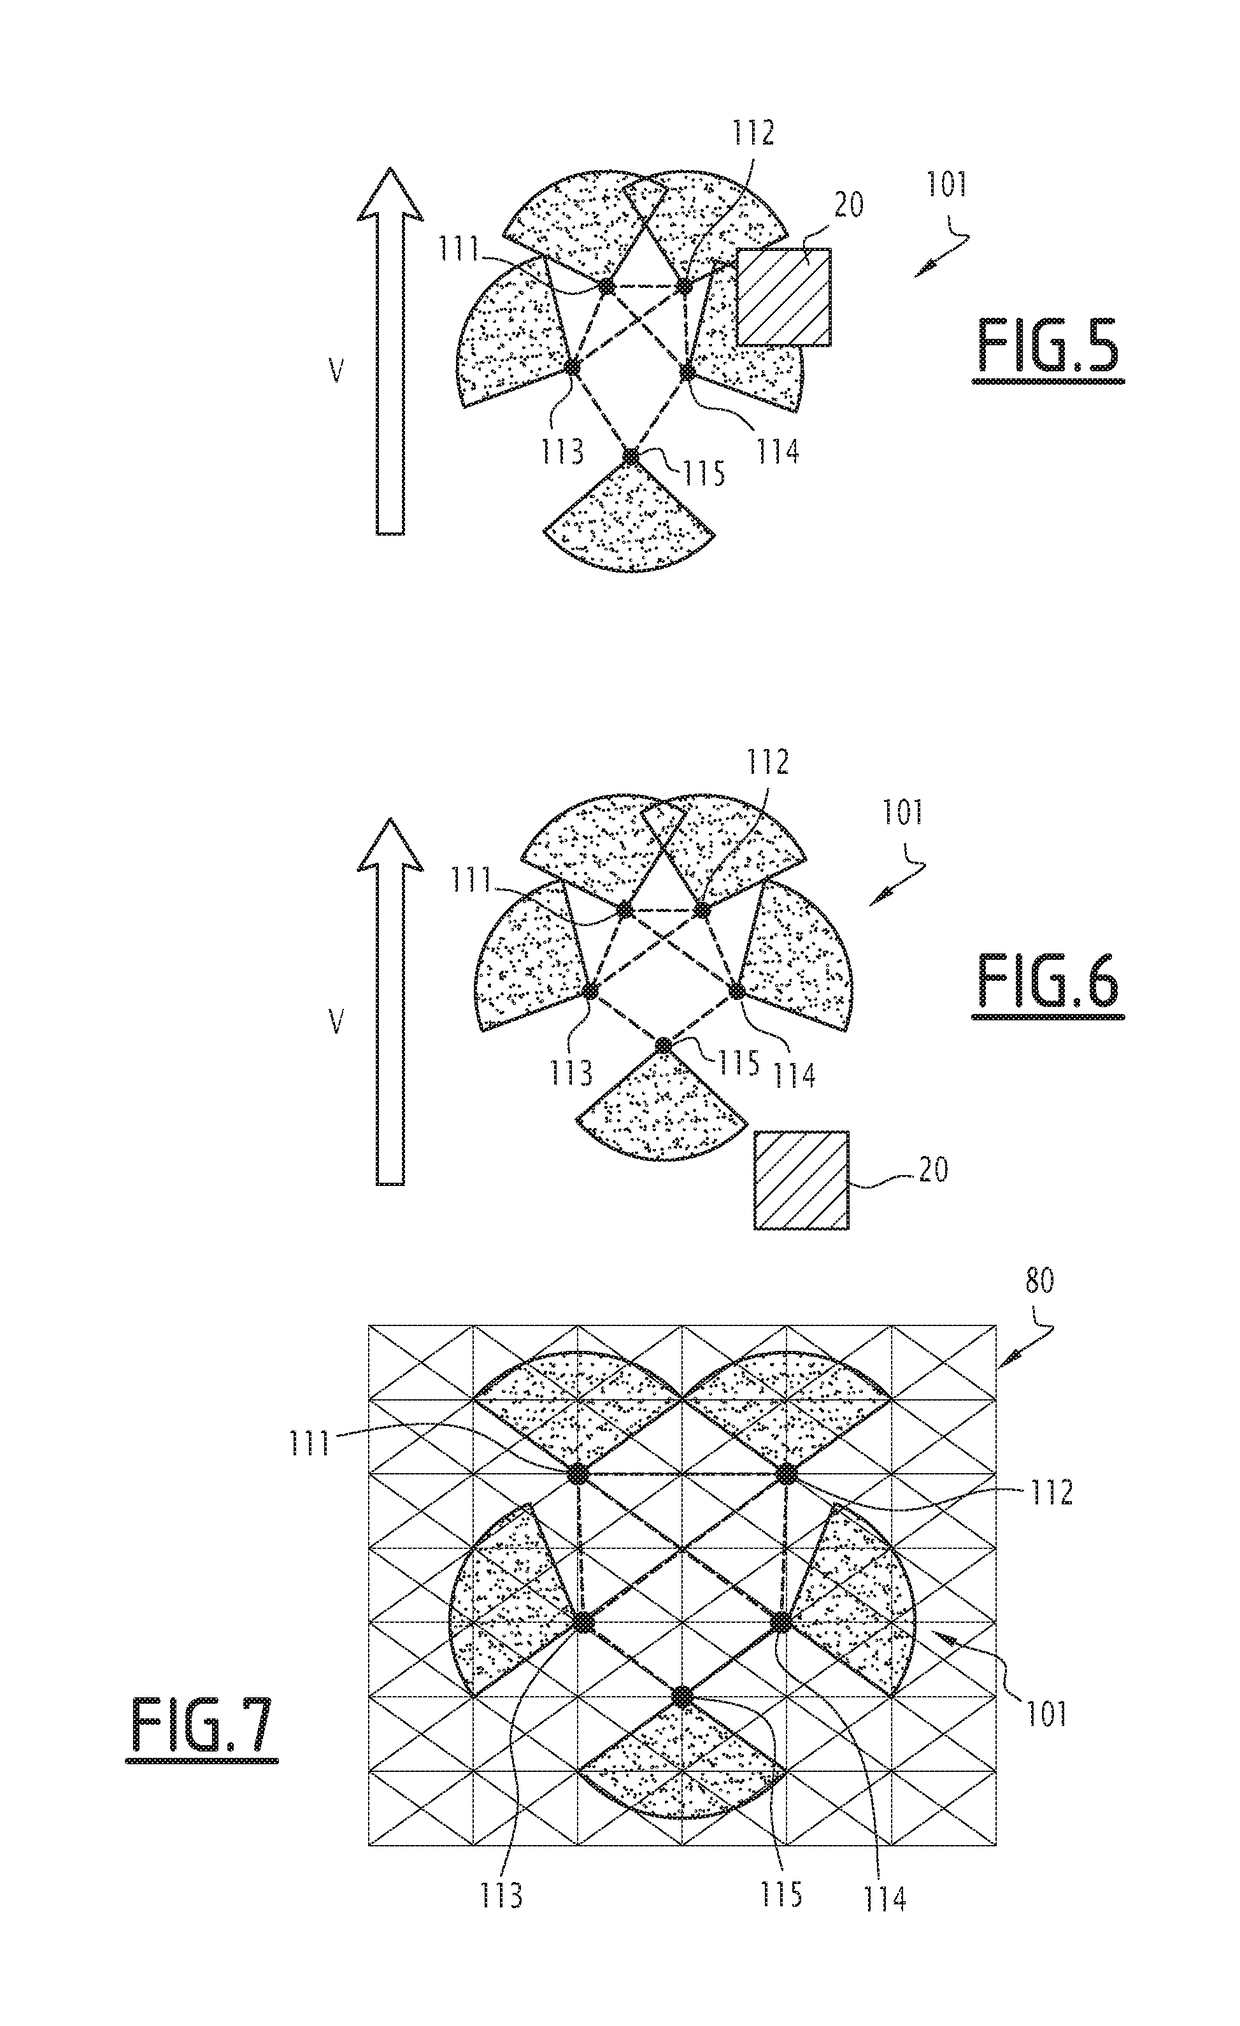 Swarm consisting of a plurality of lightweight drones